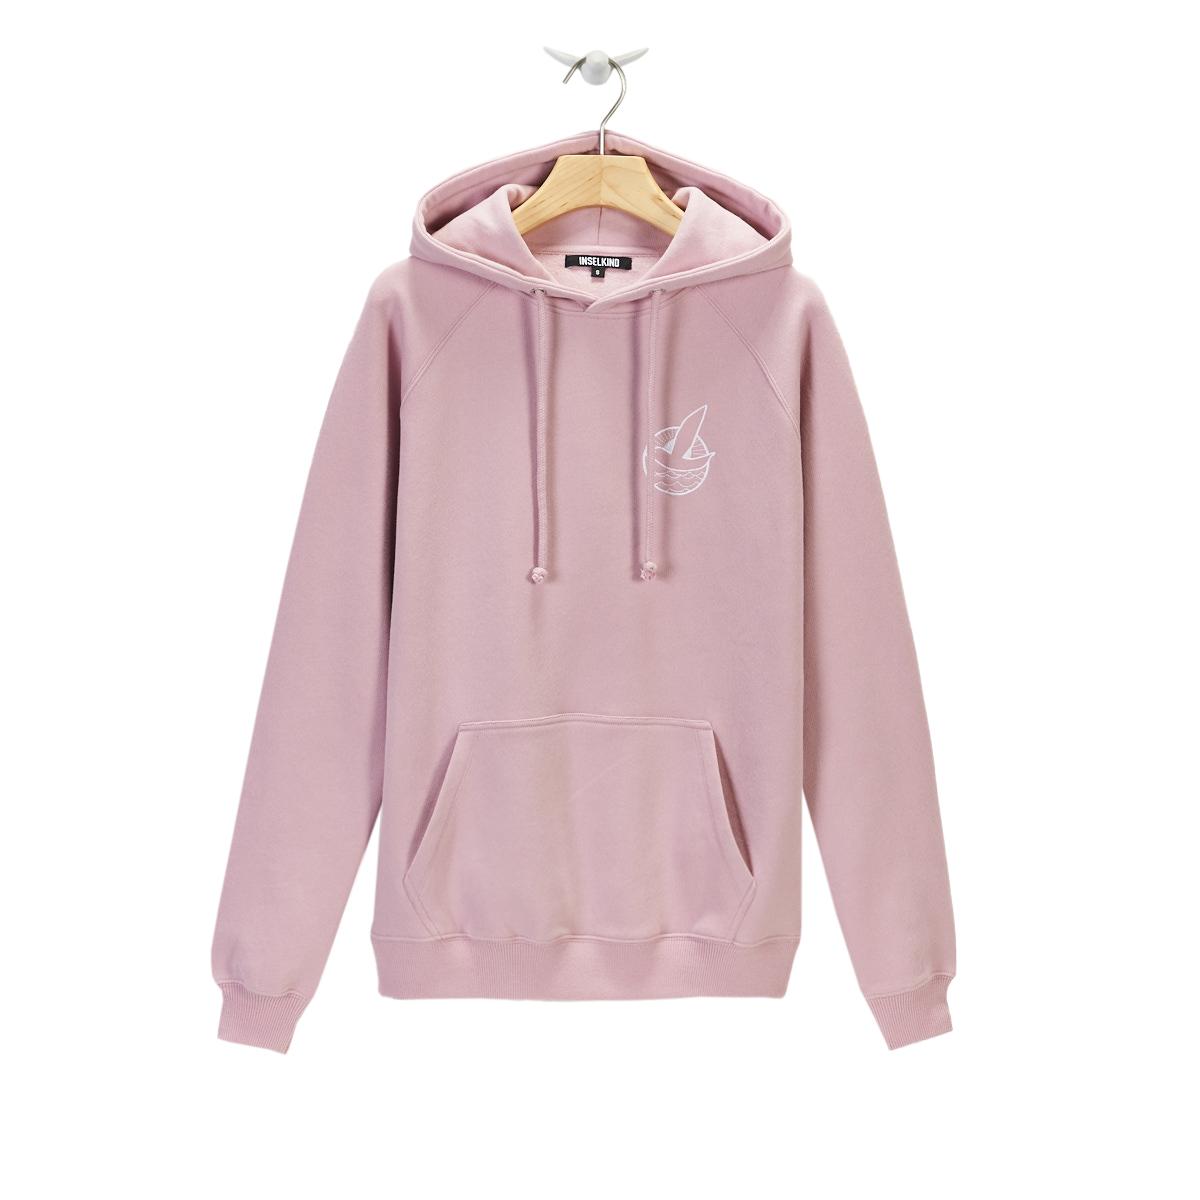 Classic Hoody INSELKIND / pale pink